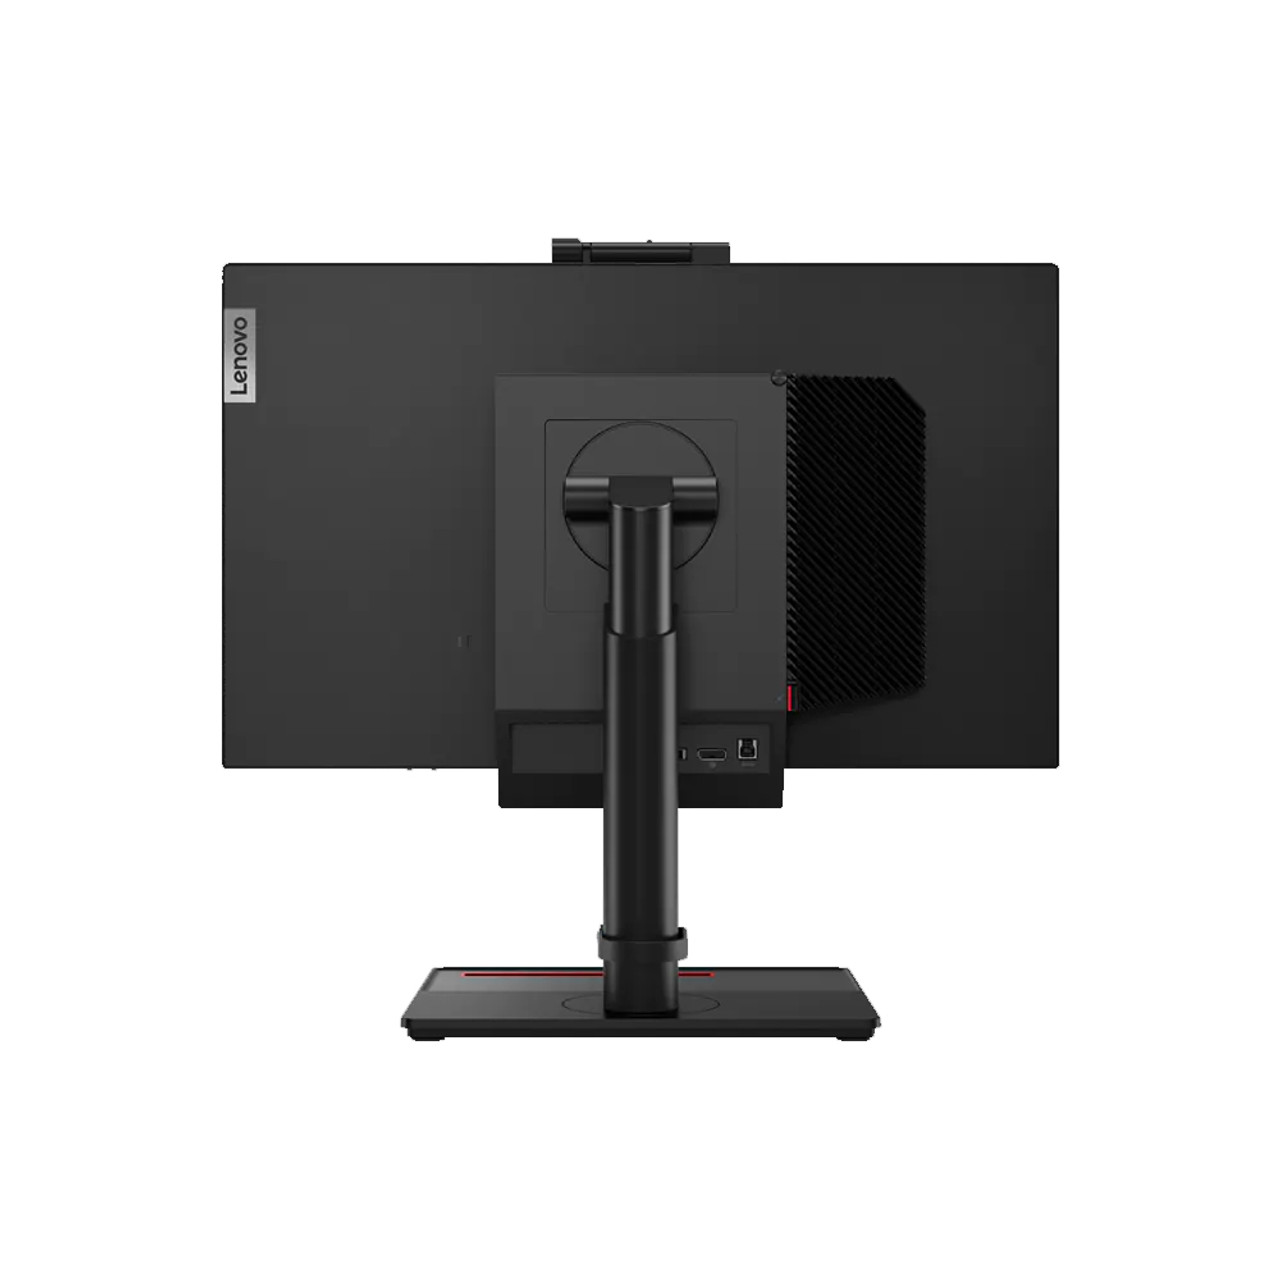 Lenovo ThinkCentre Tiny-In-One 24 Gen4 23.8" Monitor 1920 x 1080 IPS 60Hz 4ms 250 nits | 11GCPAR1US | Manufacturer Refurbished